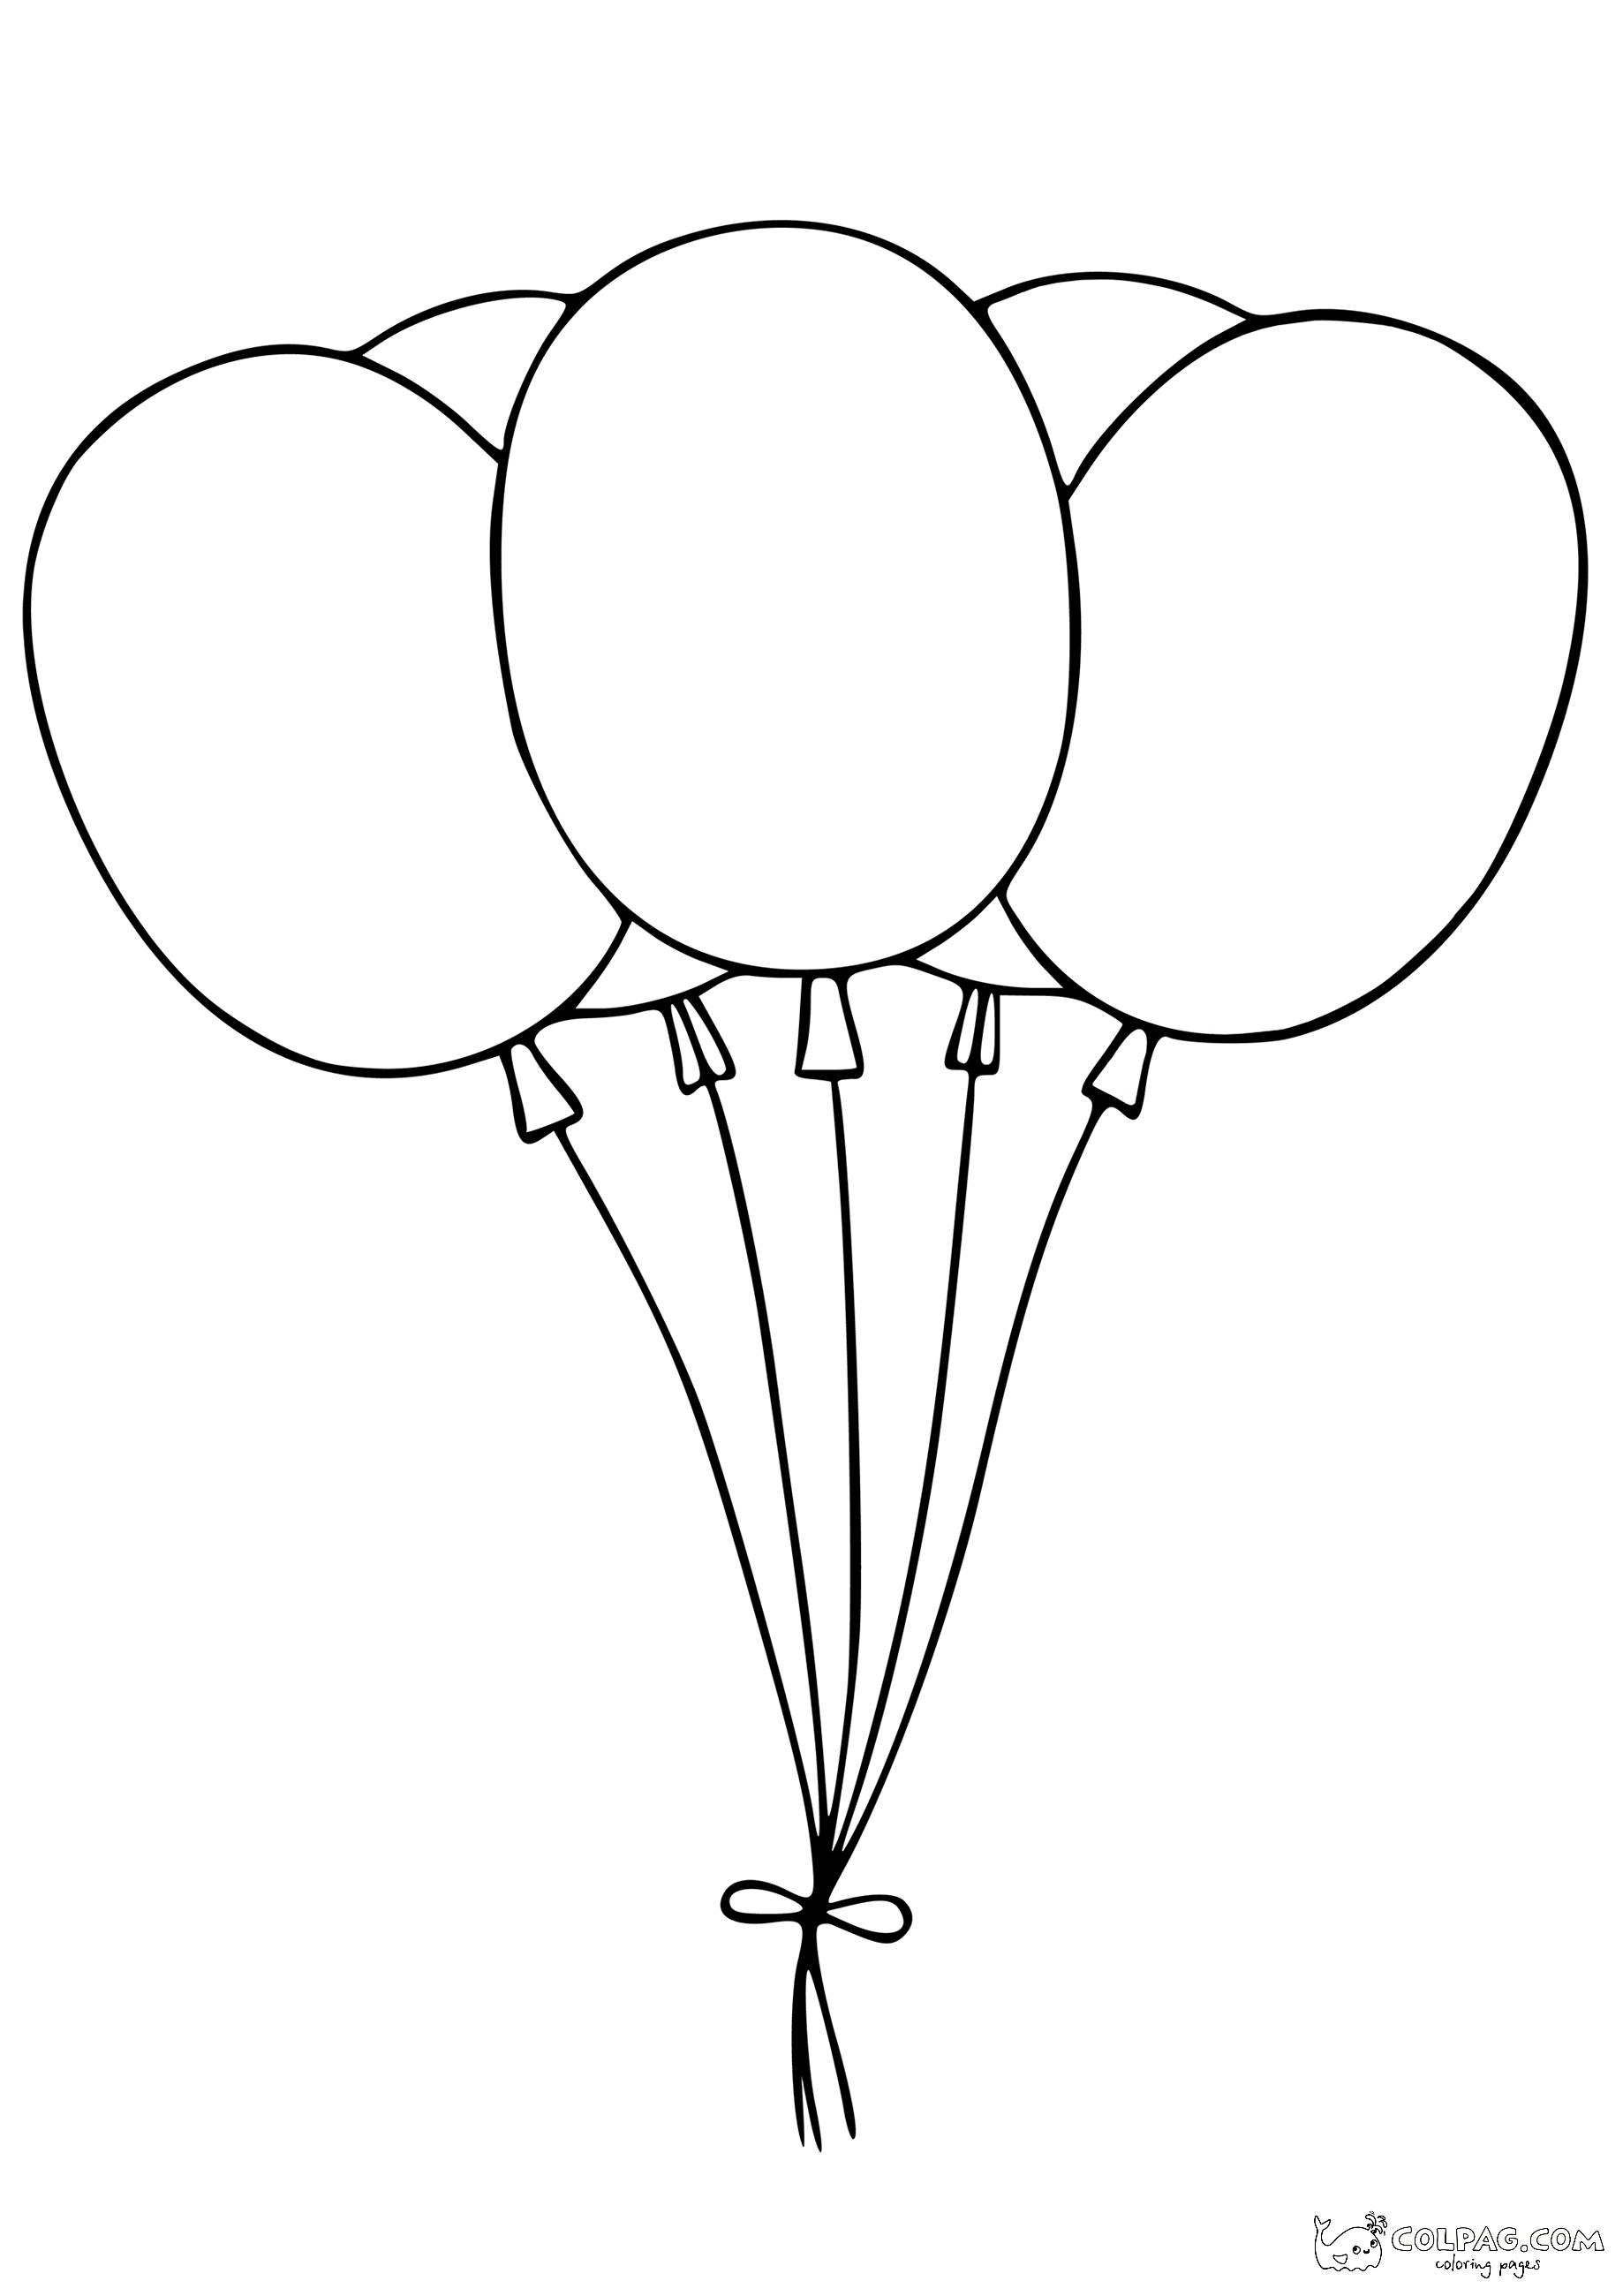 5-hiding-birthday-baloons-coloring-page-colpag-5